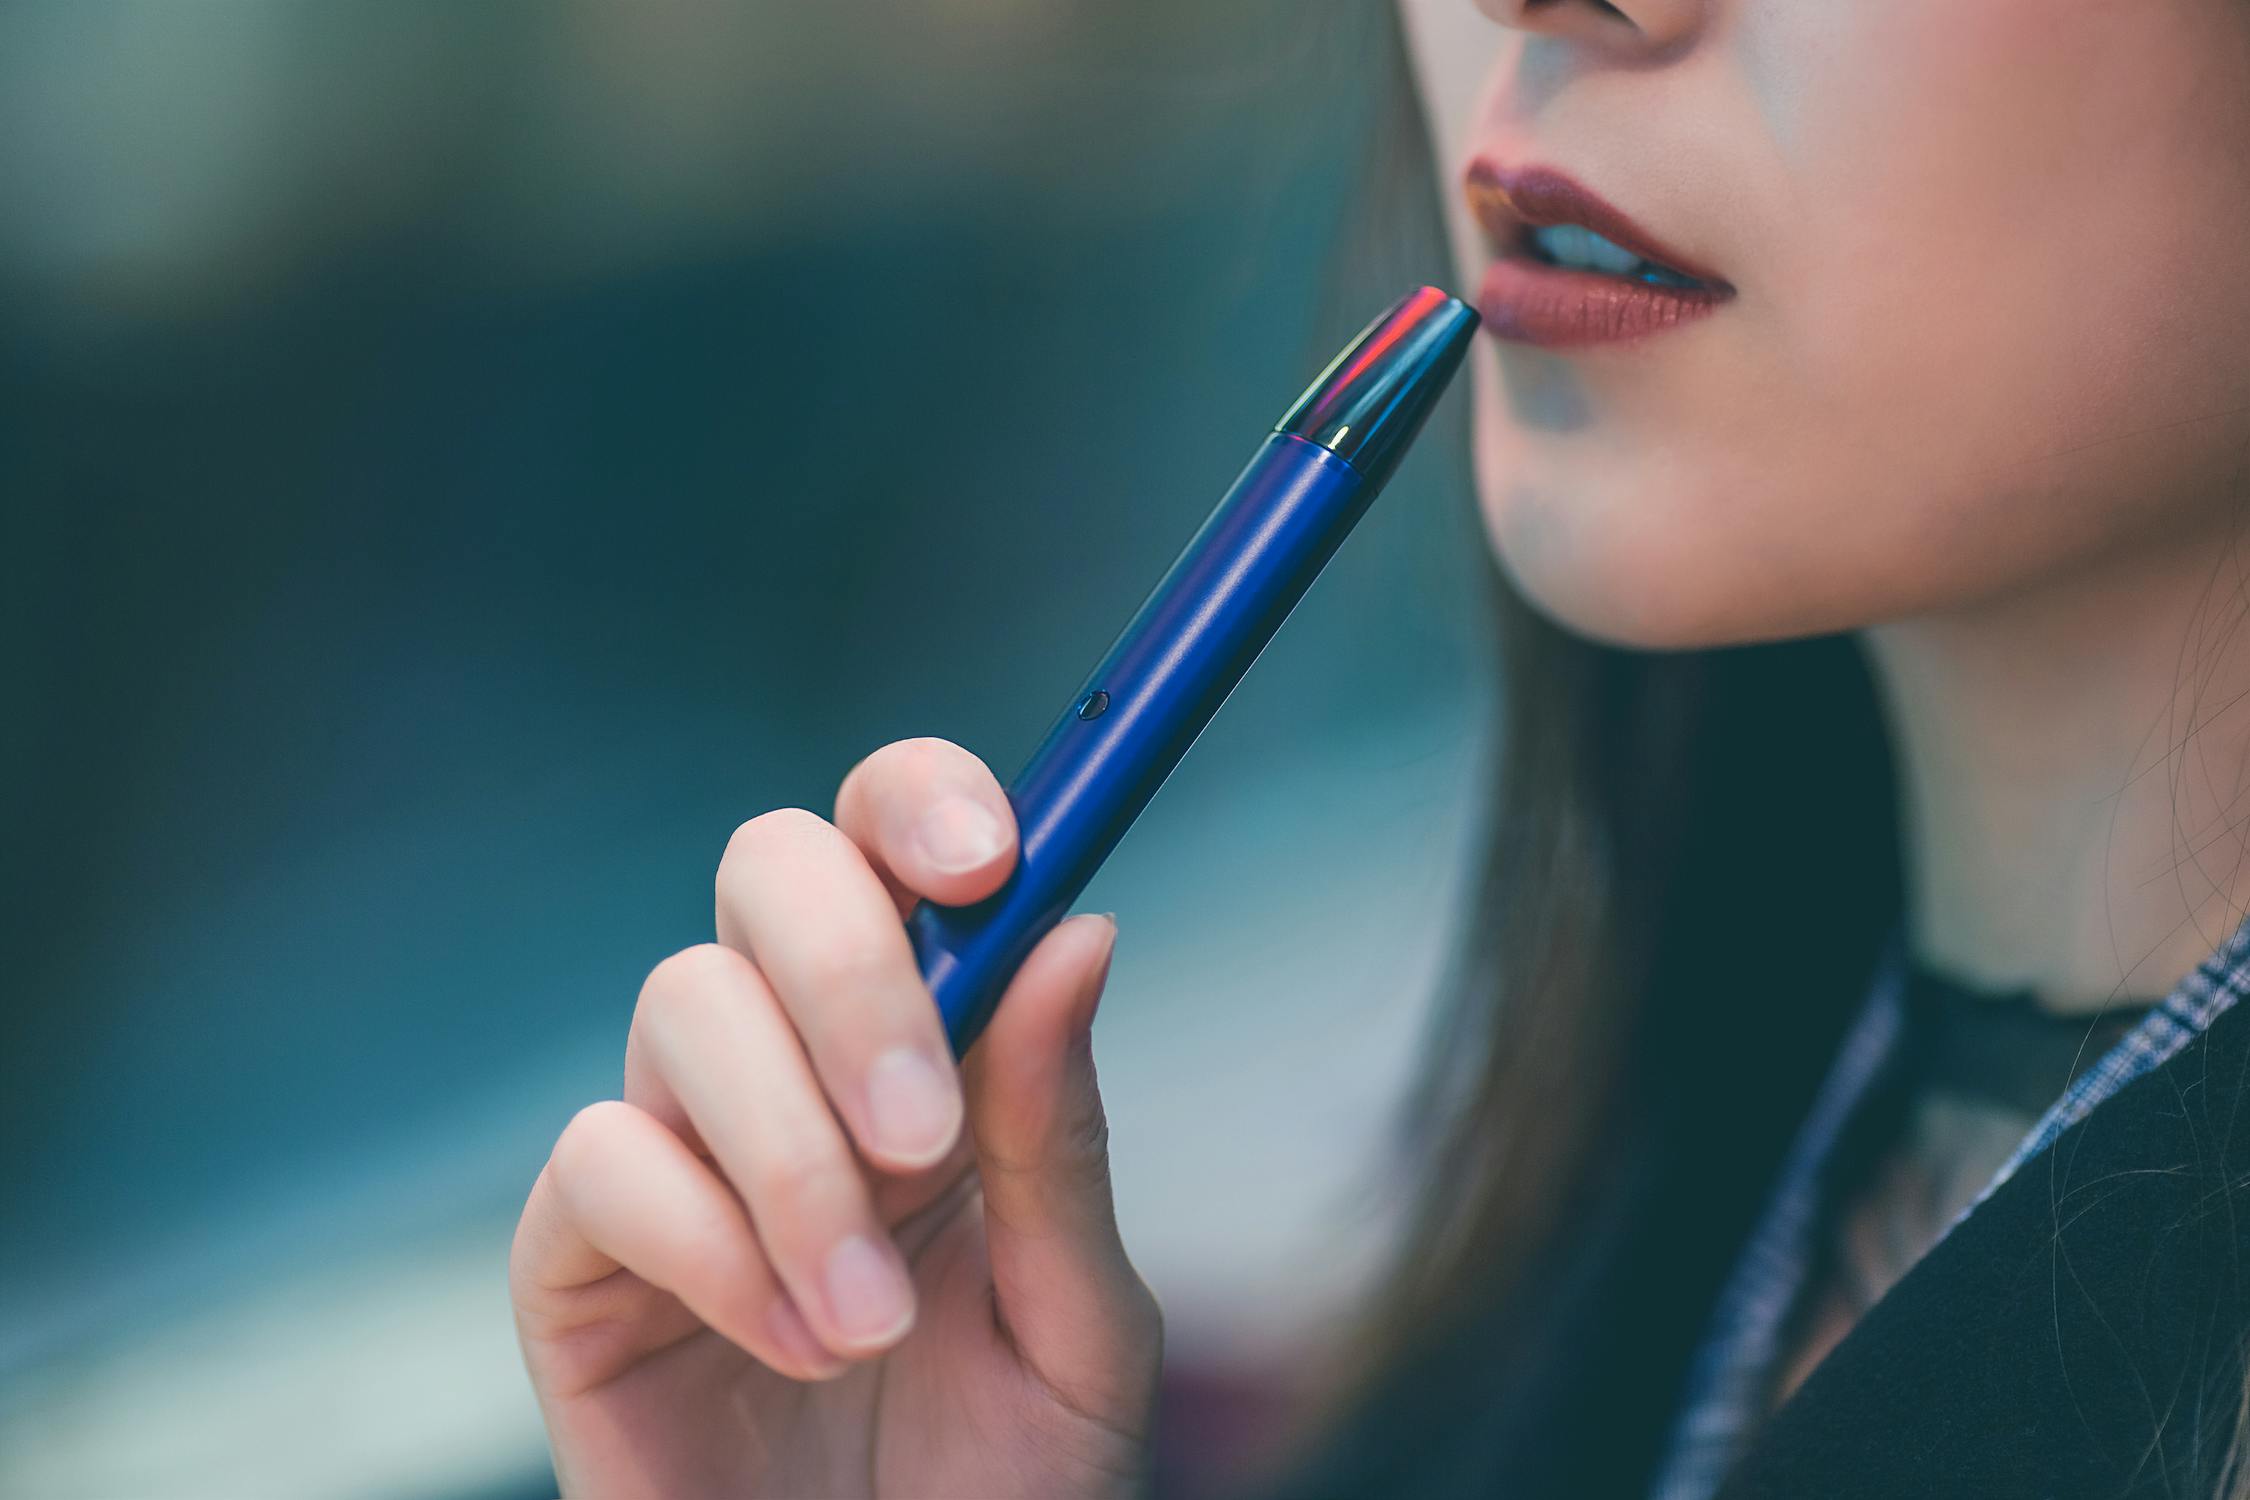 Promoting Advantages of Product Category, Such as E-Cigarettes, Can Backfire